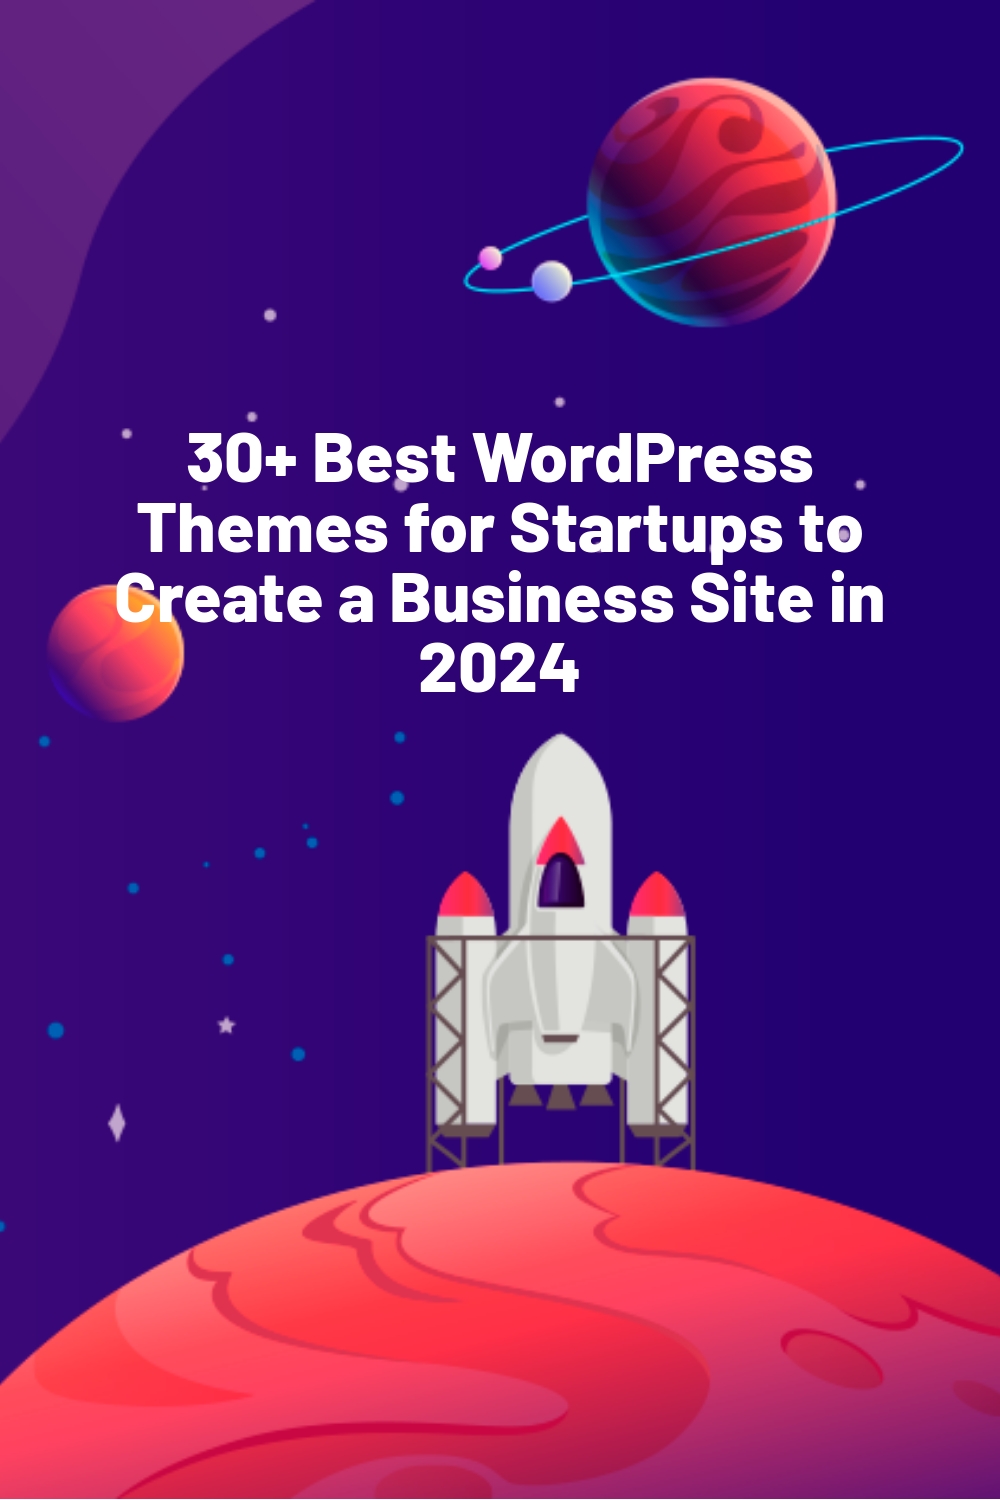 30+ Best WordPress Themes for Startups to Create a Business Site in 2024